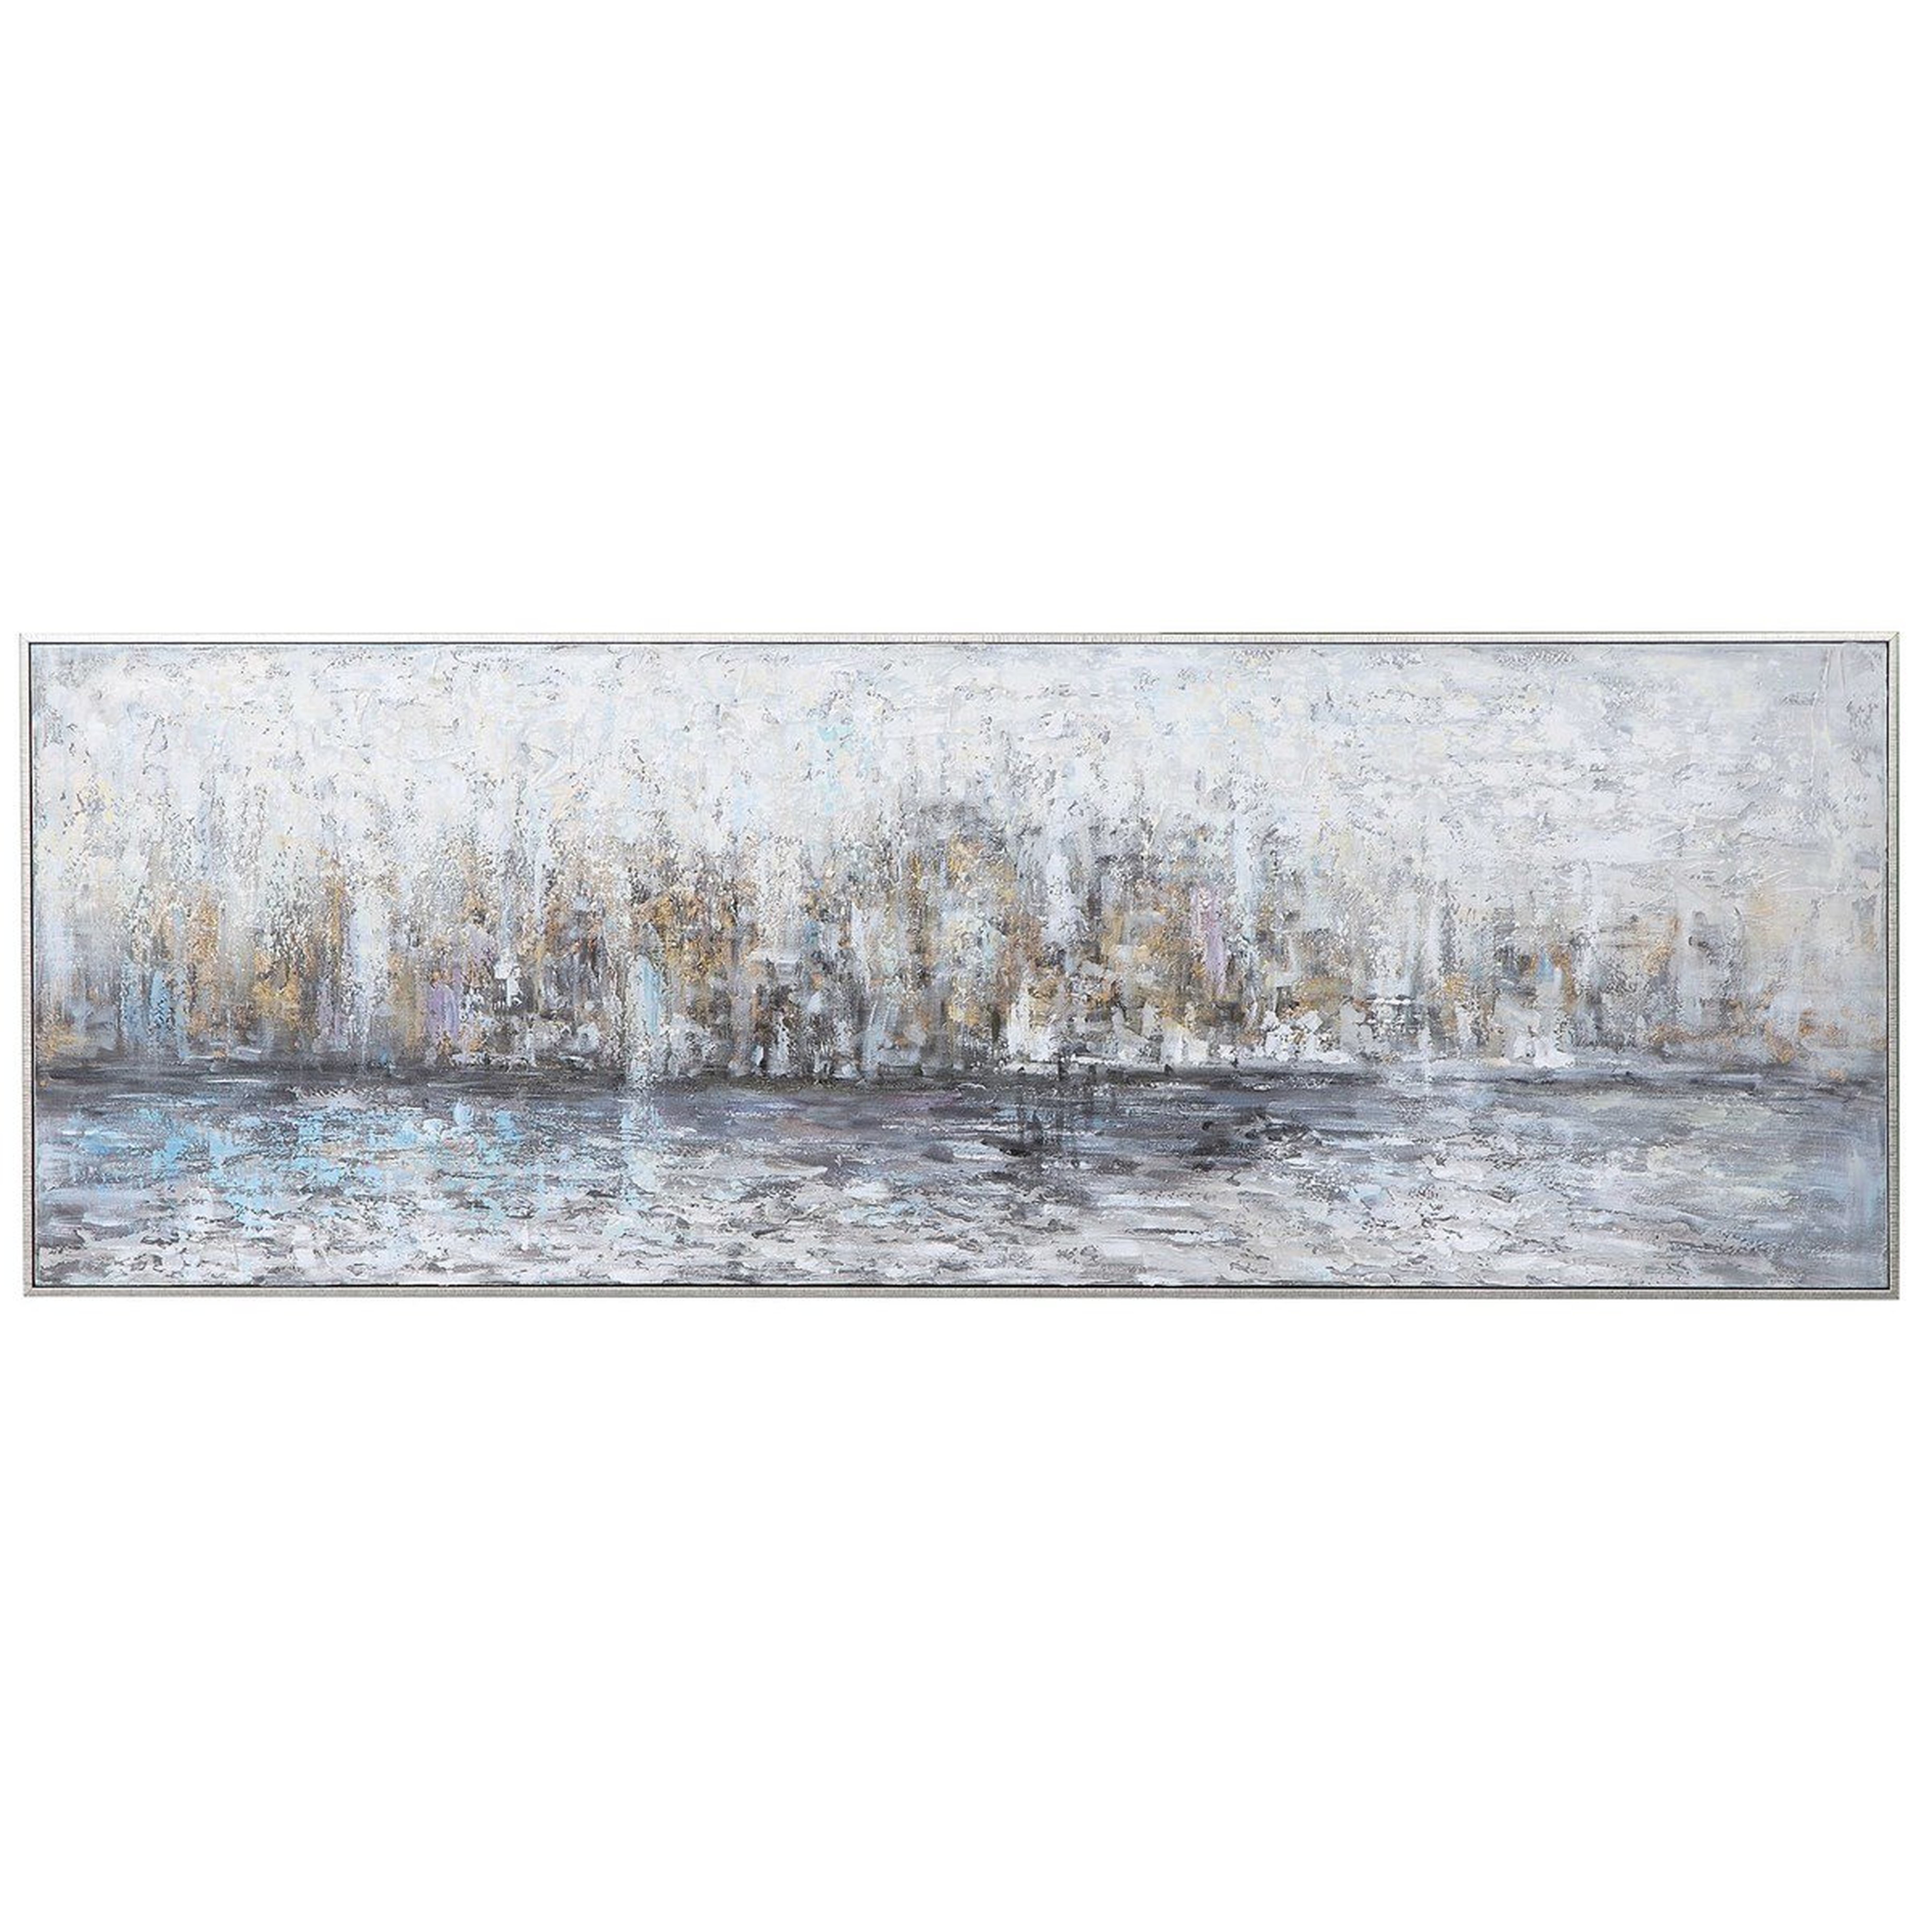 CITY REFLECTION HAND PAINTED CANVAS - Hudsonhill Foundry